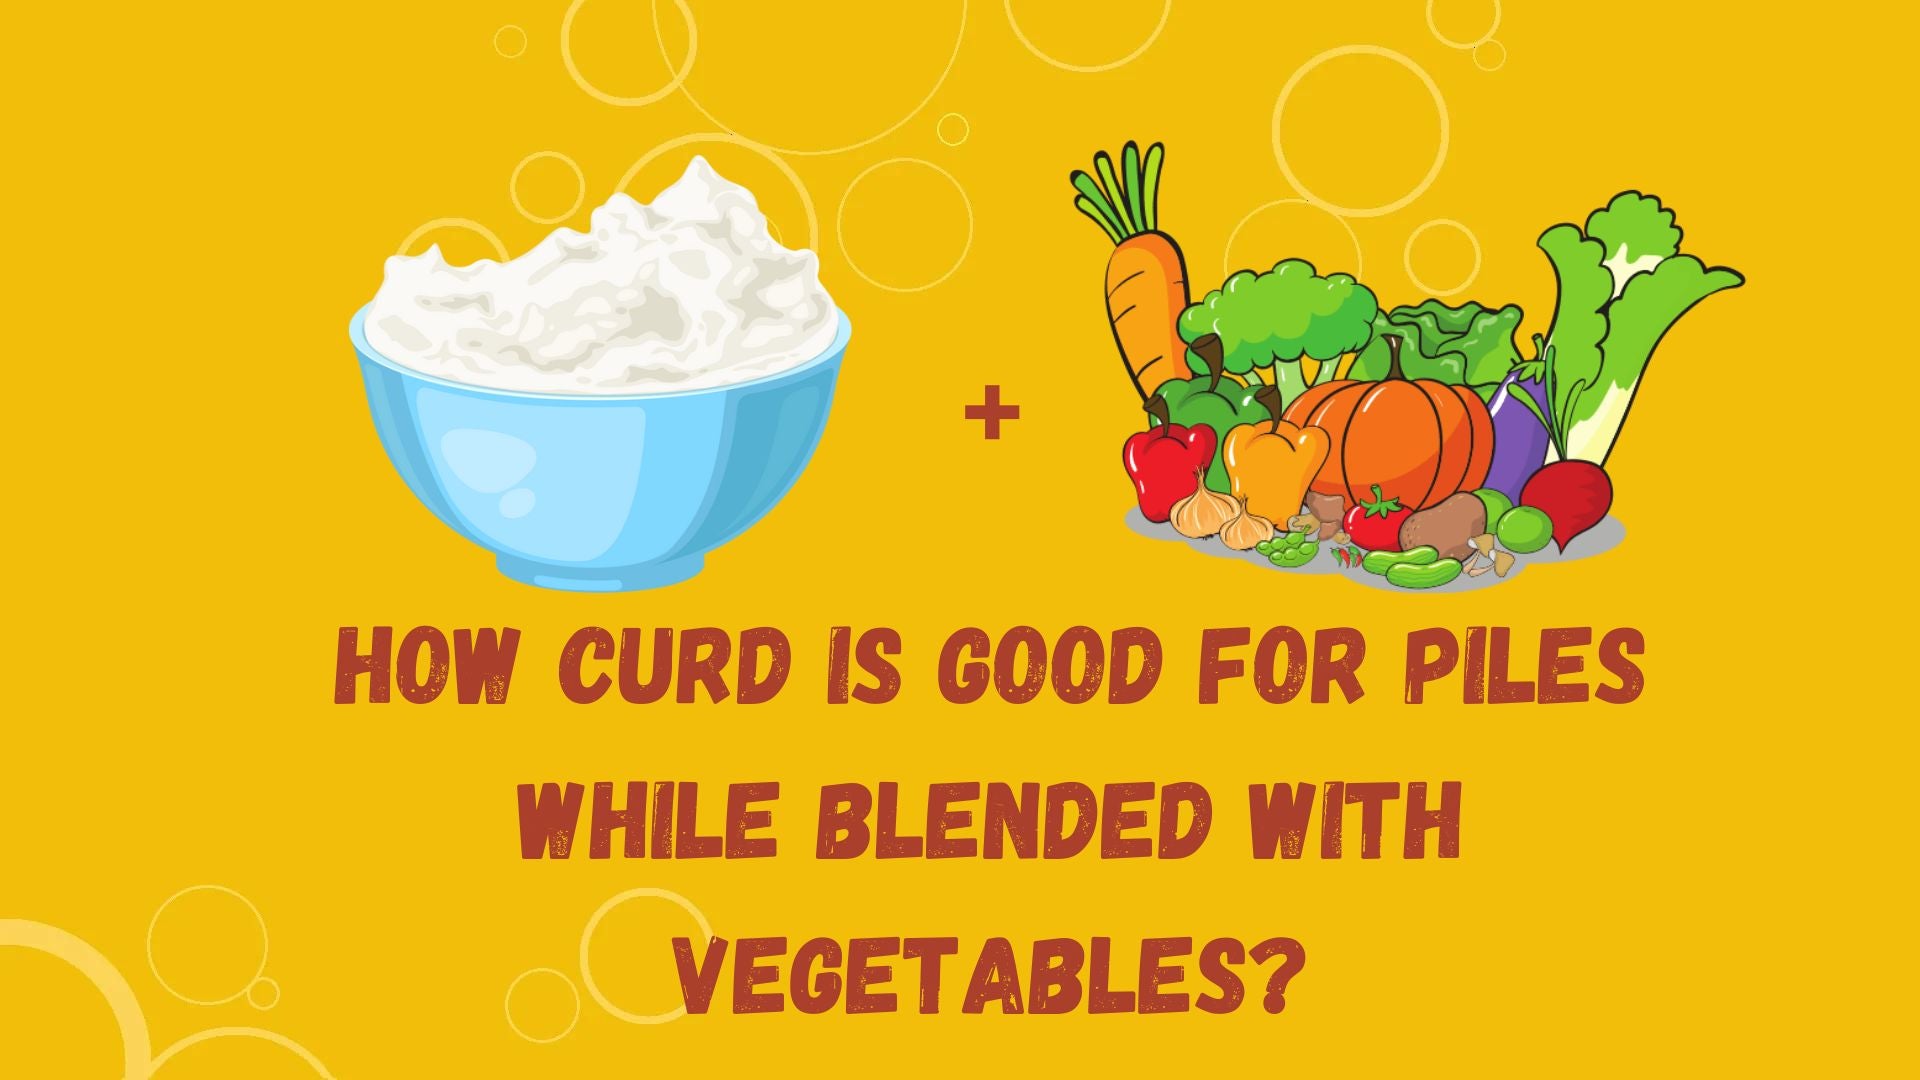 How curd is good for piles while blended with vegetables